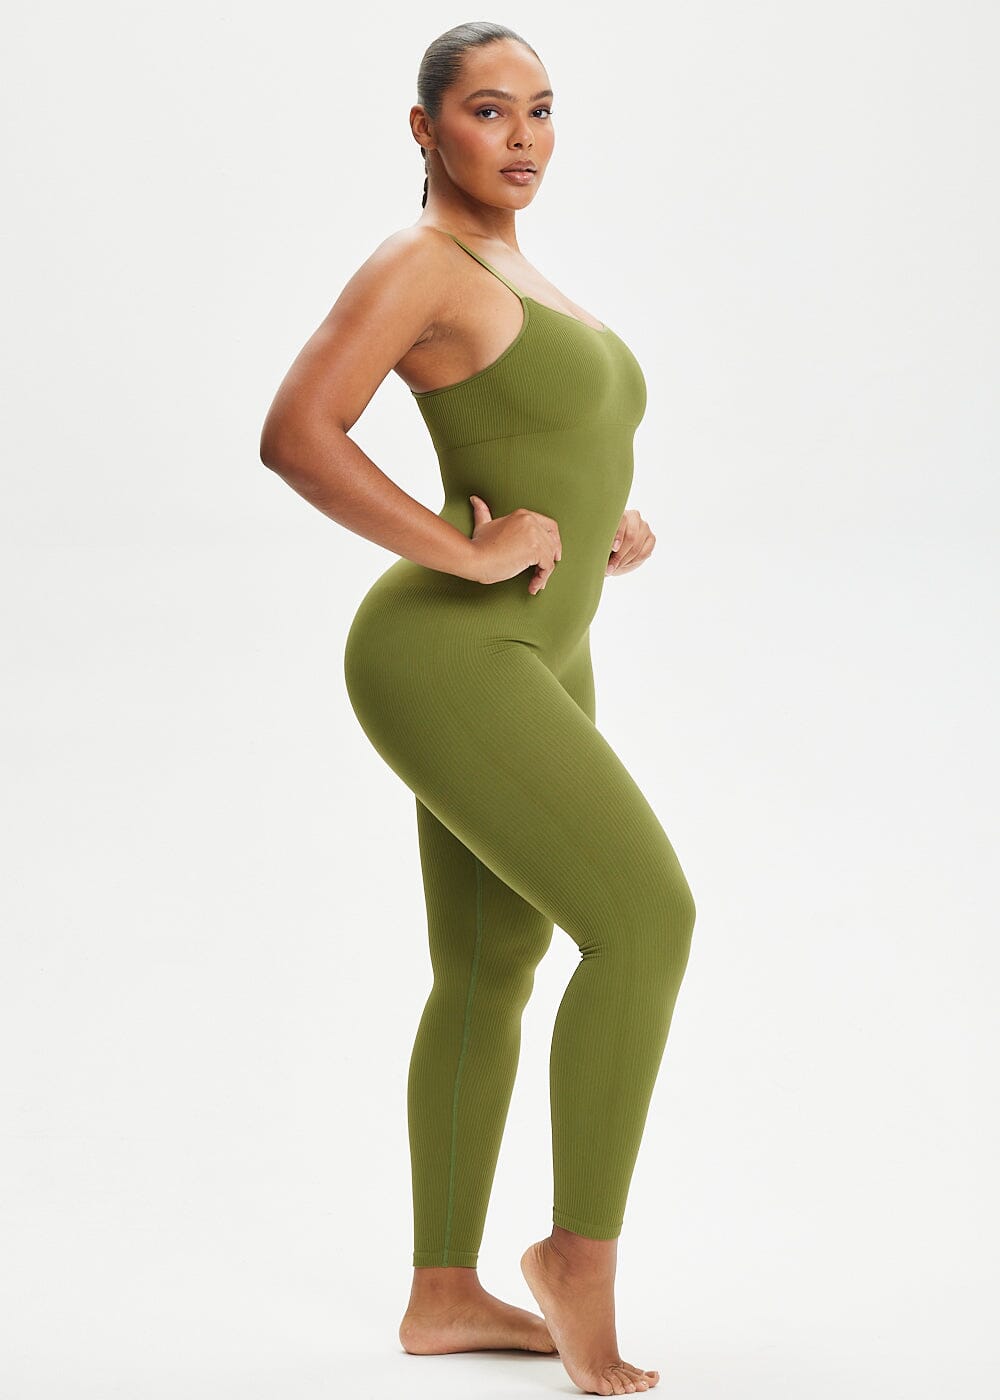 Snatching Seamless Jumpsuit - She's Waisted